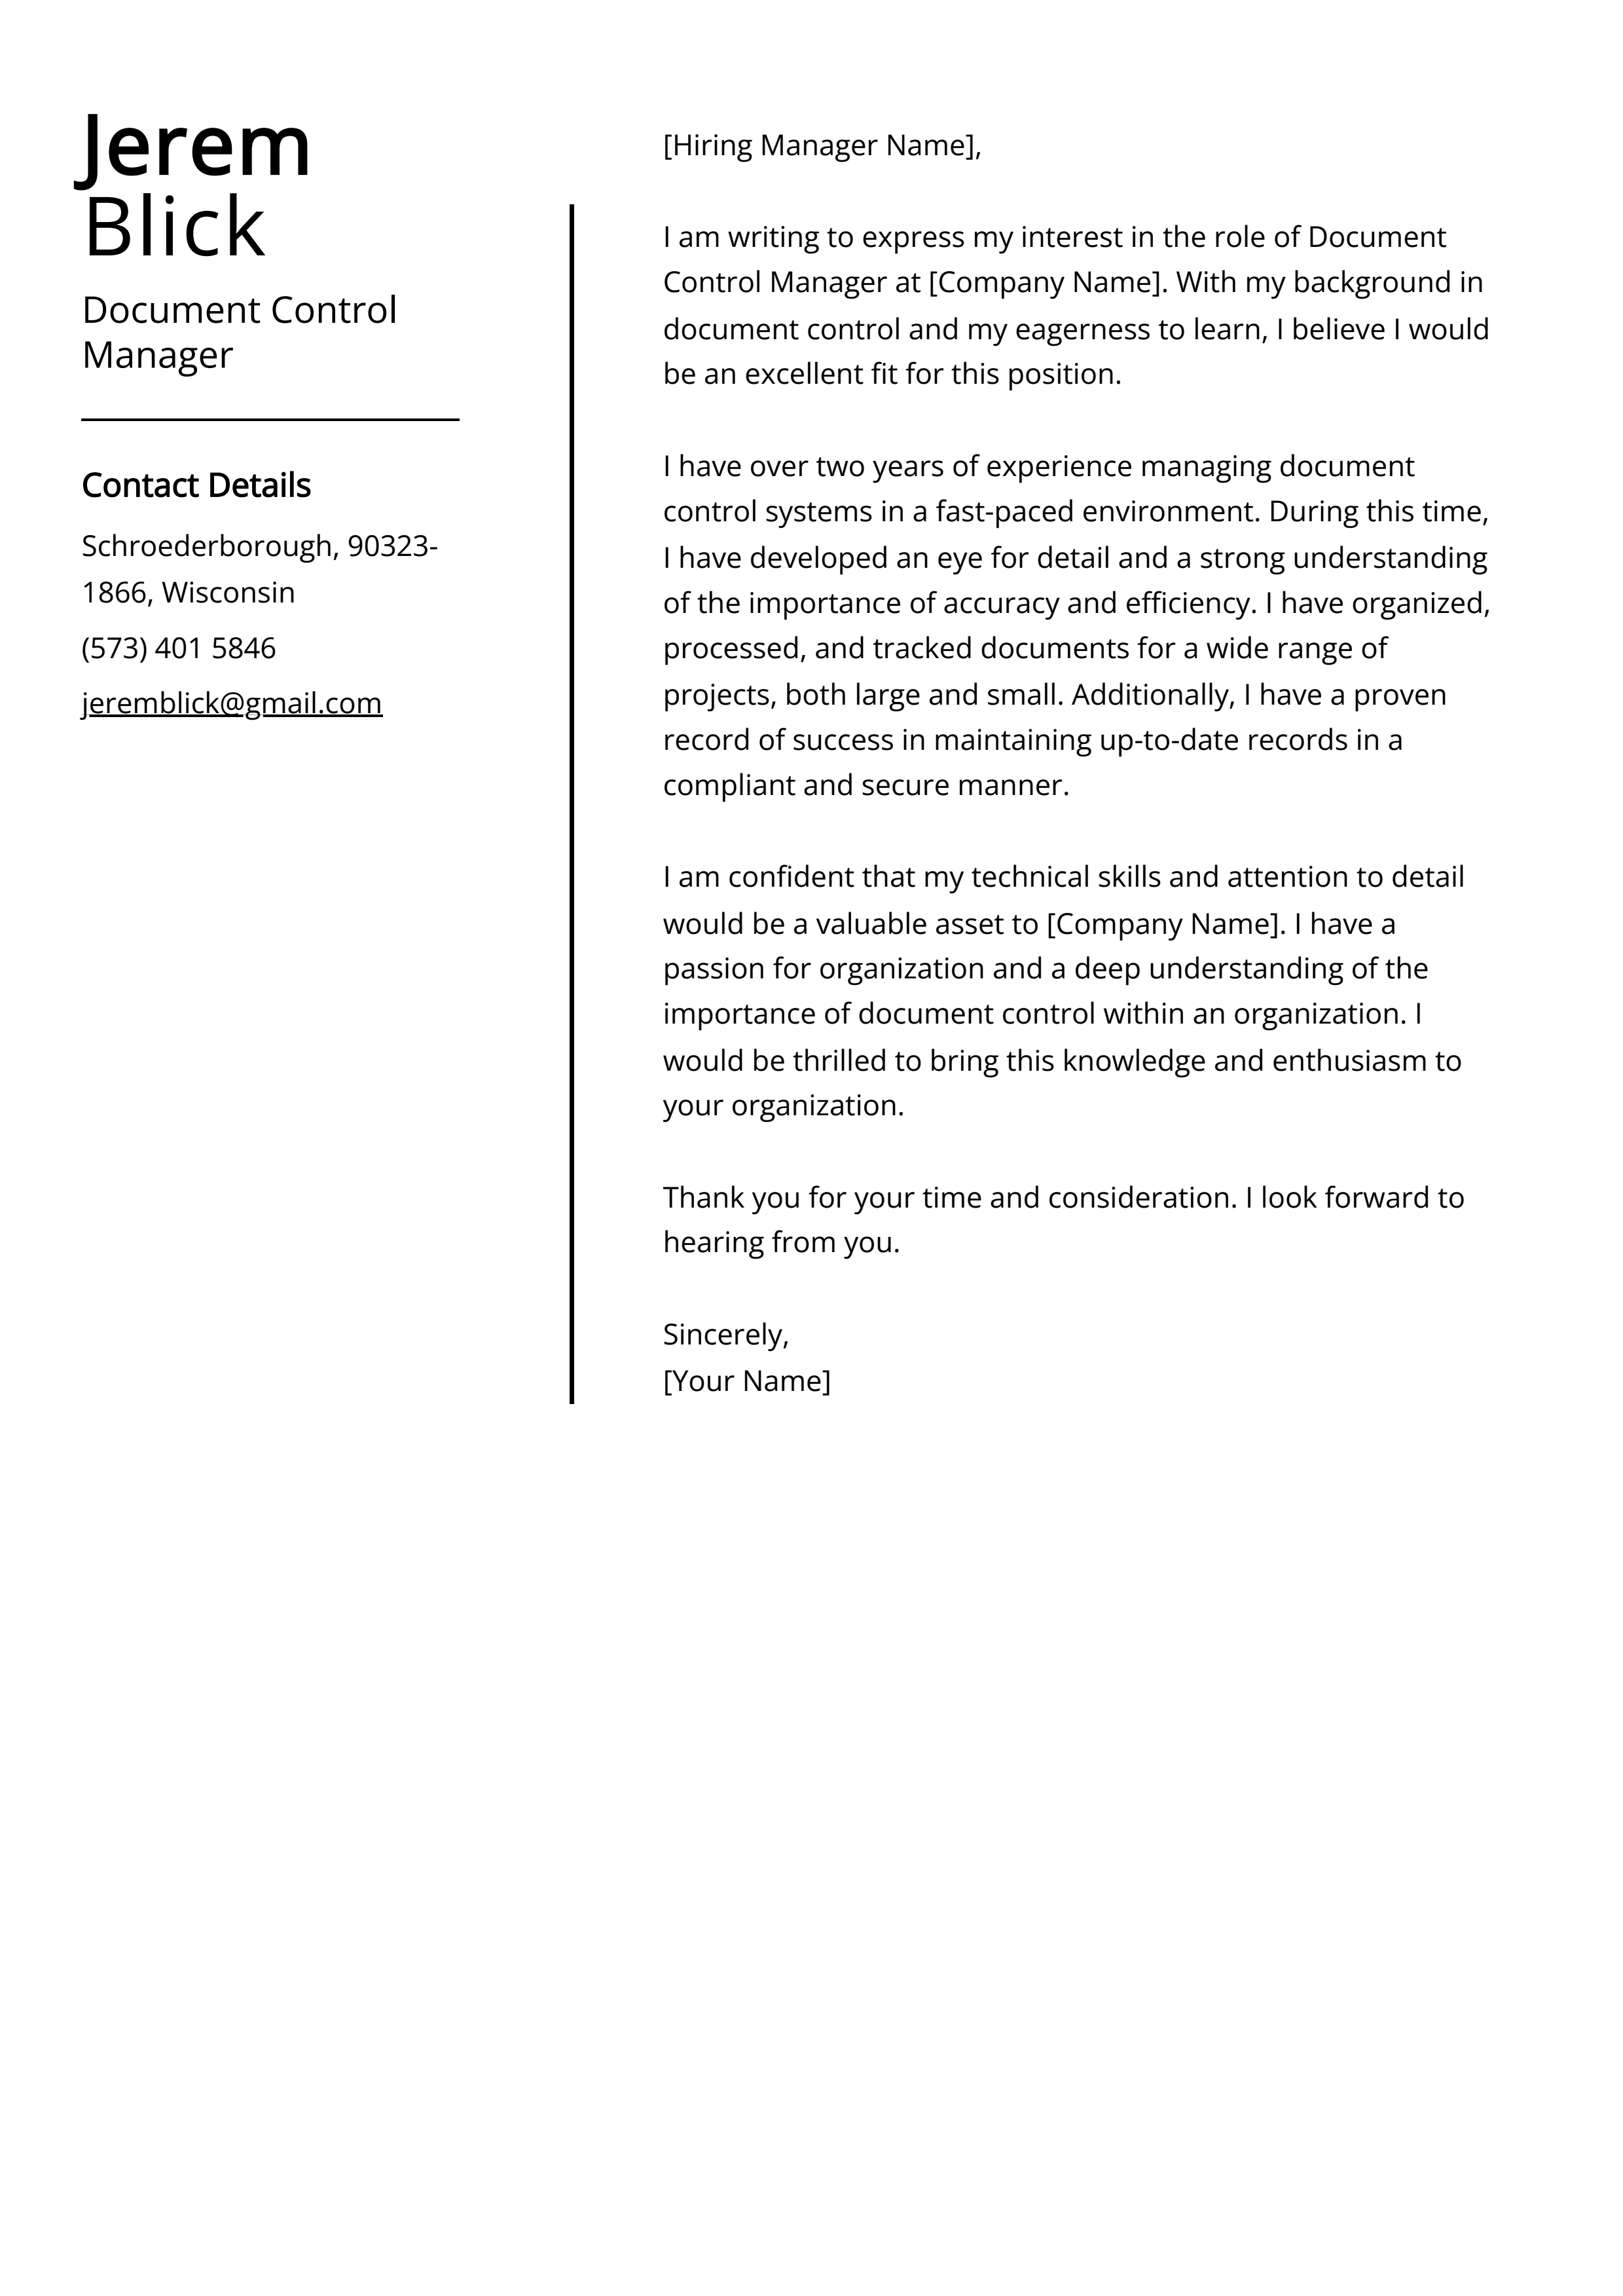 Document Control Manager Cover Letter Example